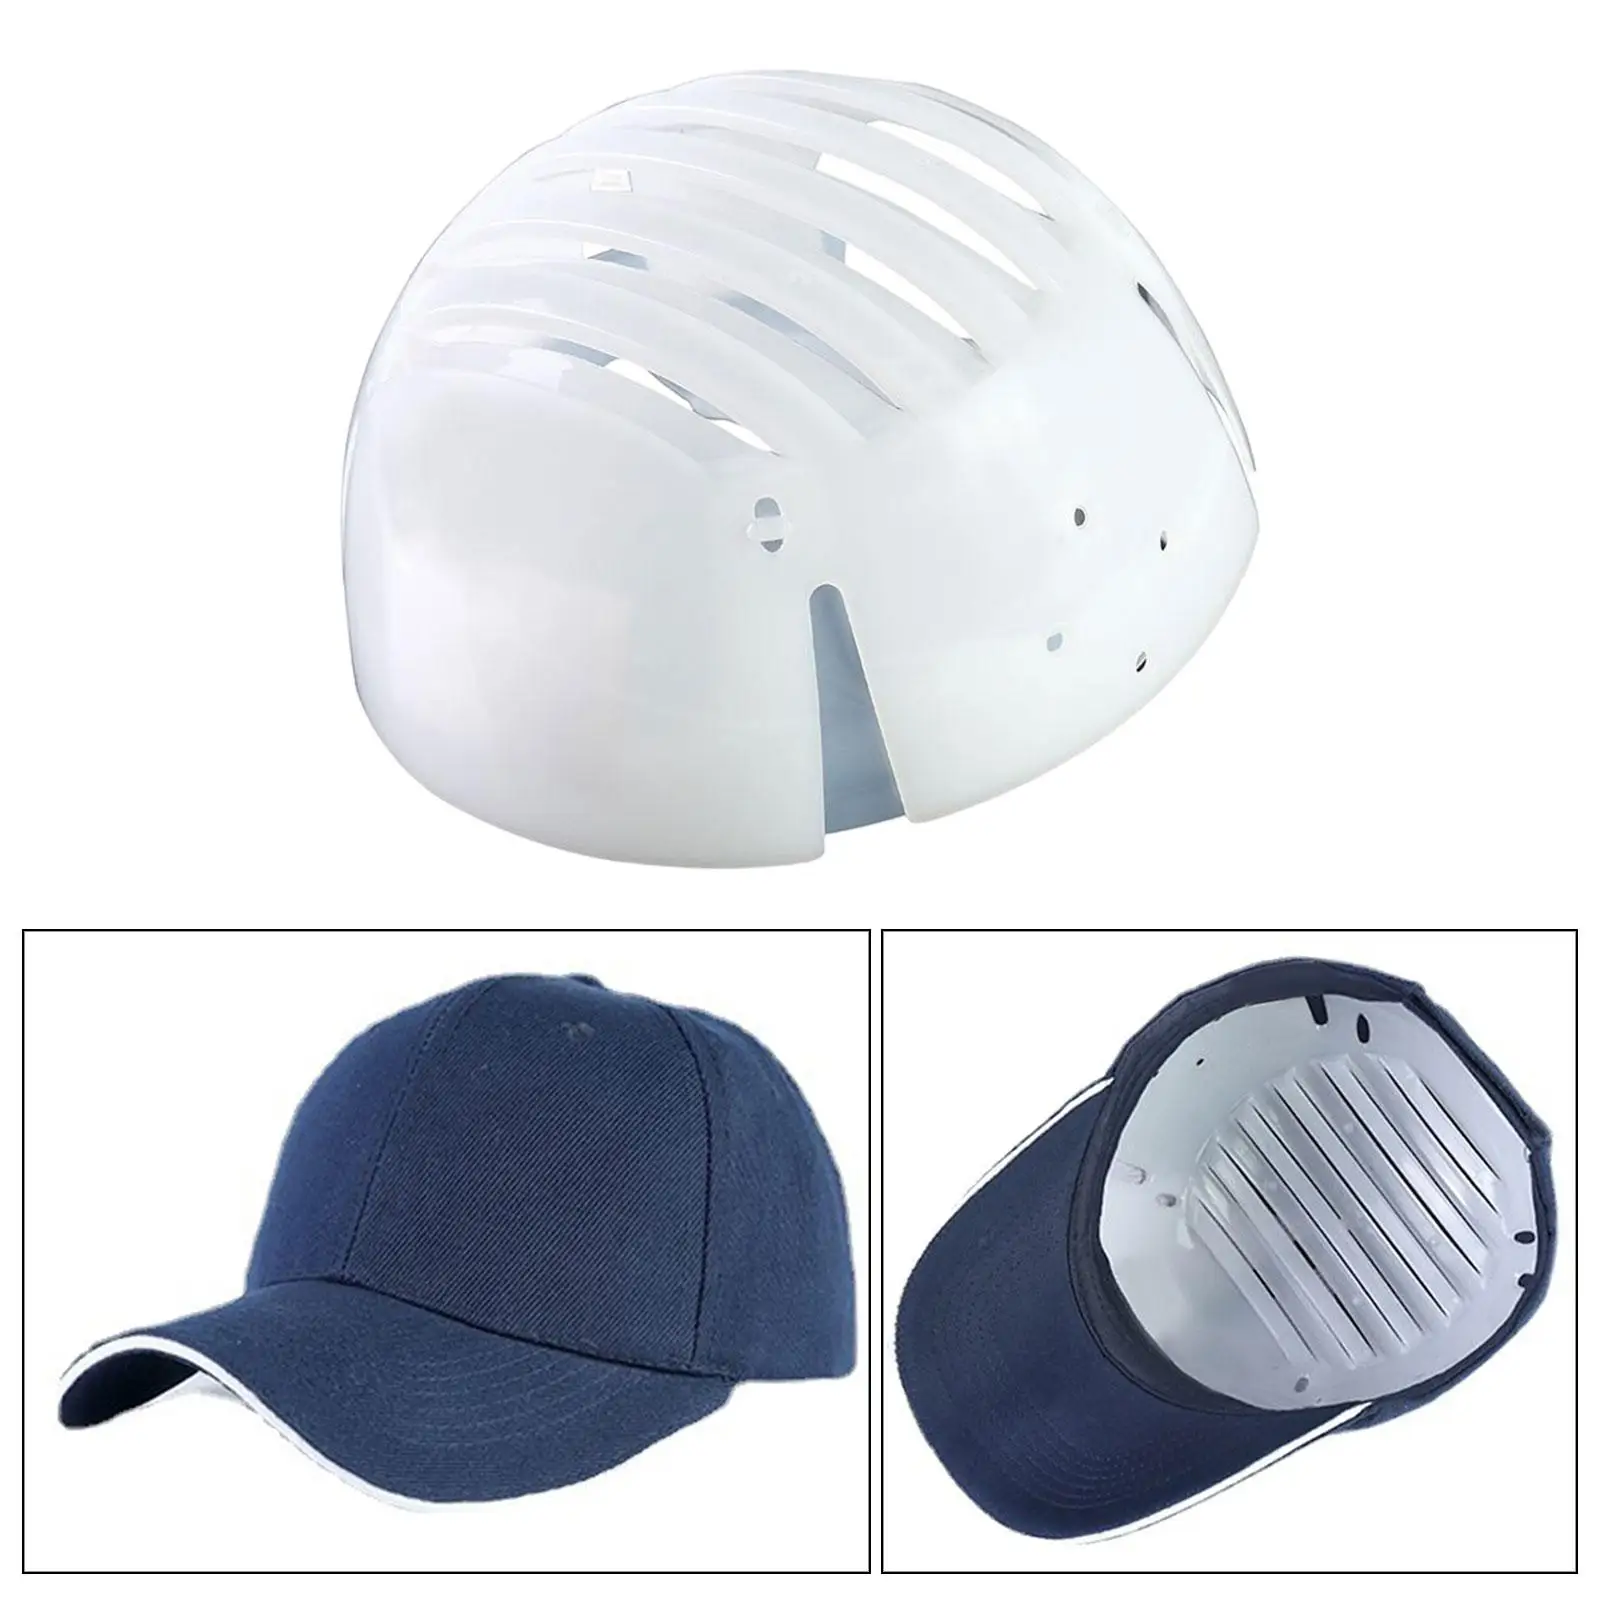 Outside Safety Helmet Protective Hat Lining White Simple to Use Comfort Durable Head Protection Bump Cap Insert for Hat Outdoor